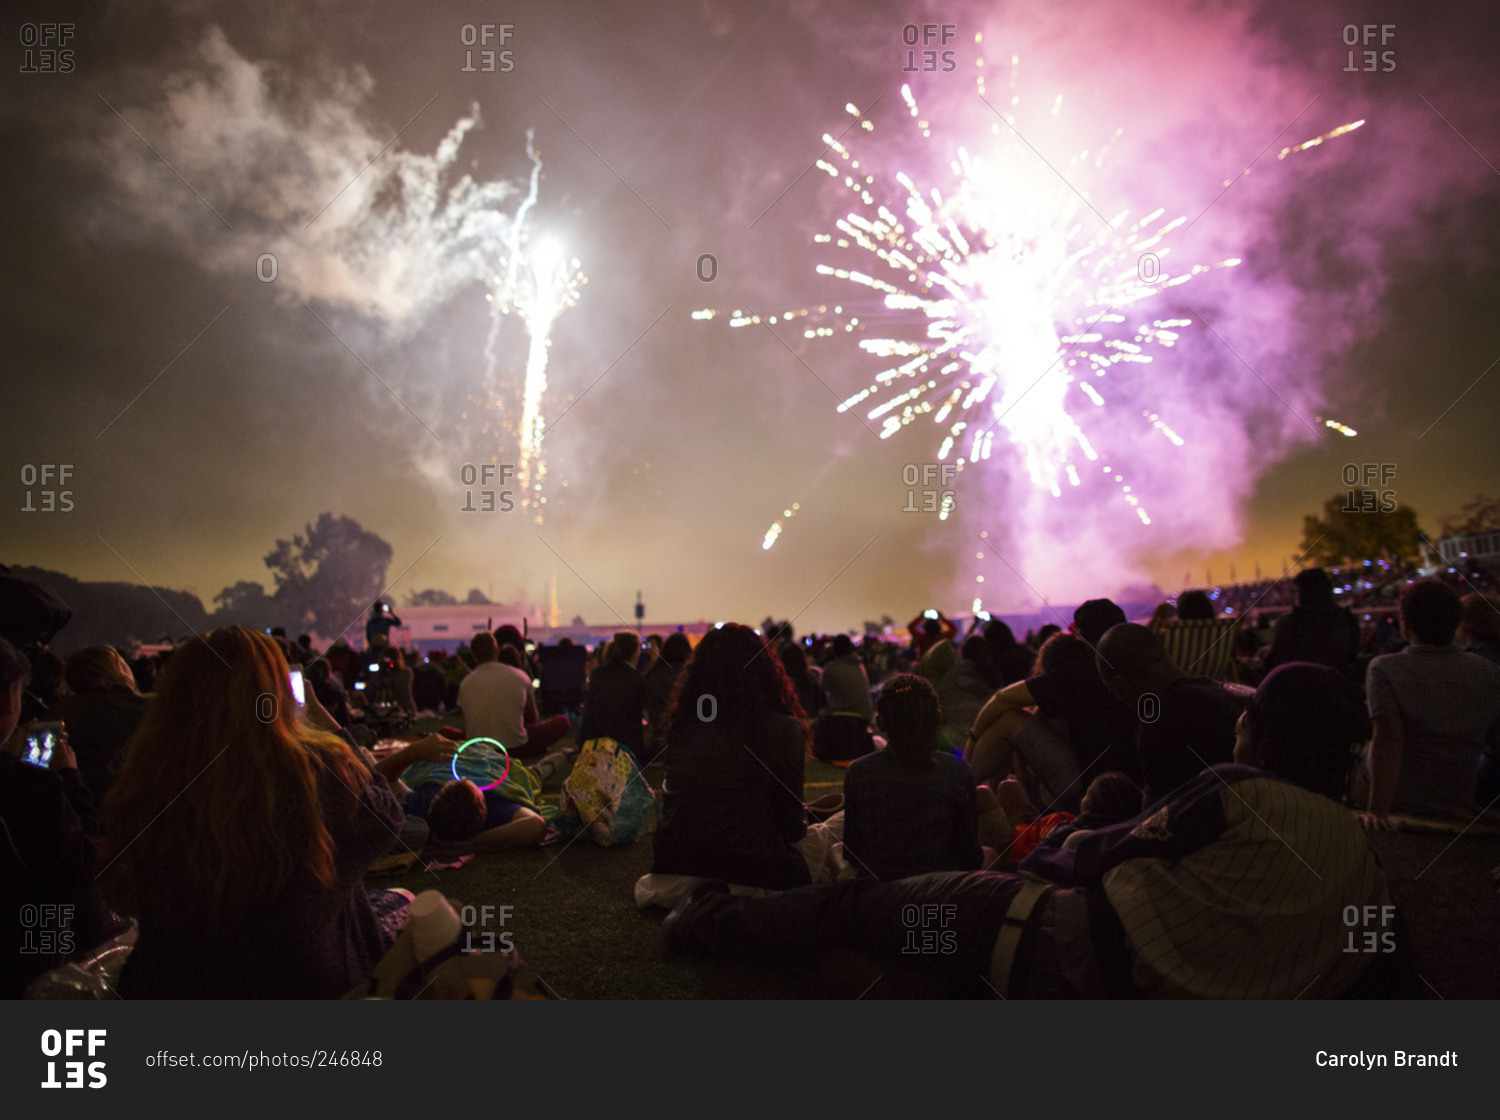 Fireworks display over a crowd in park